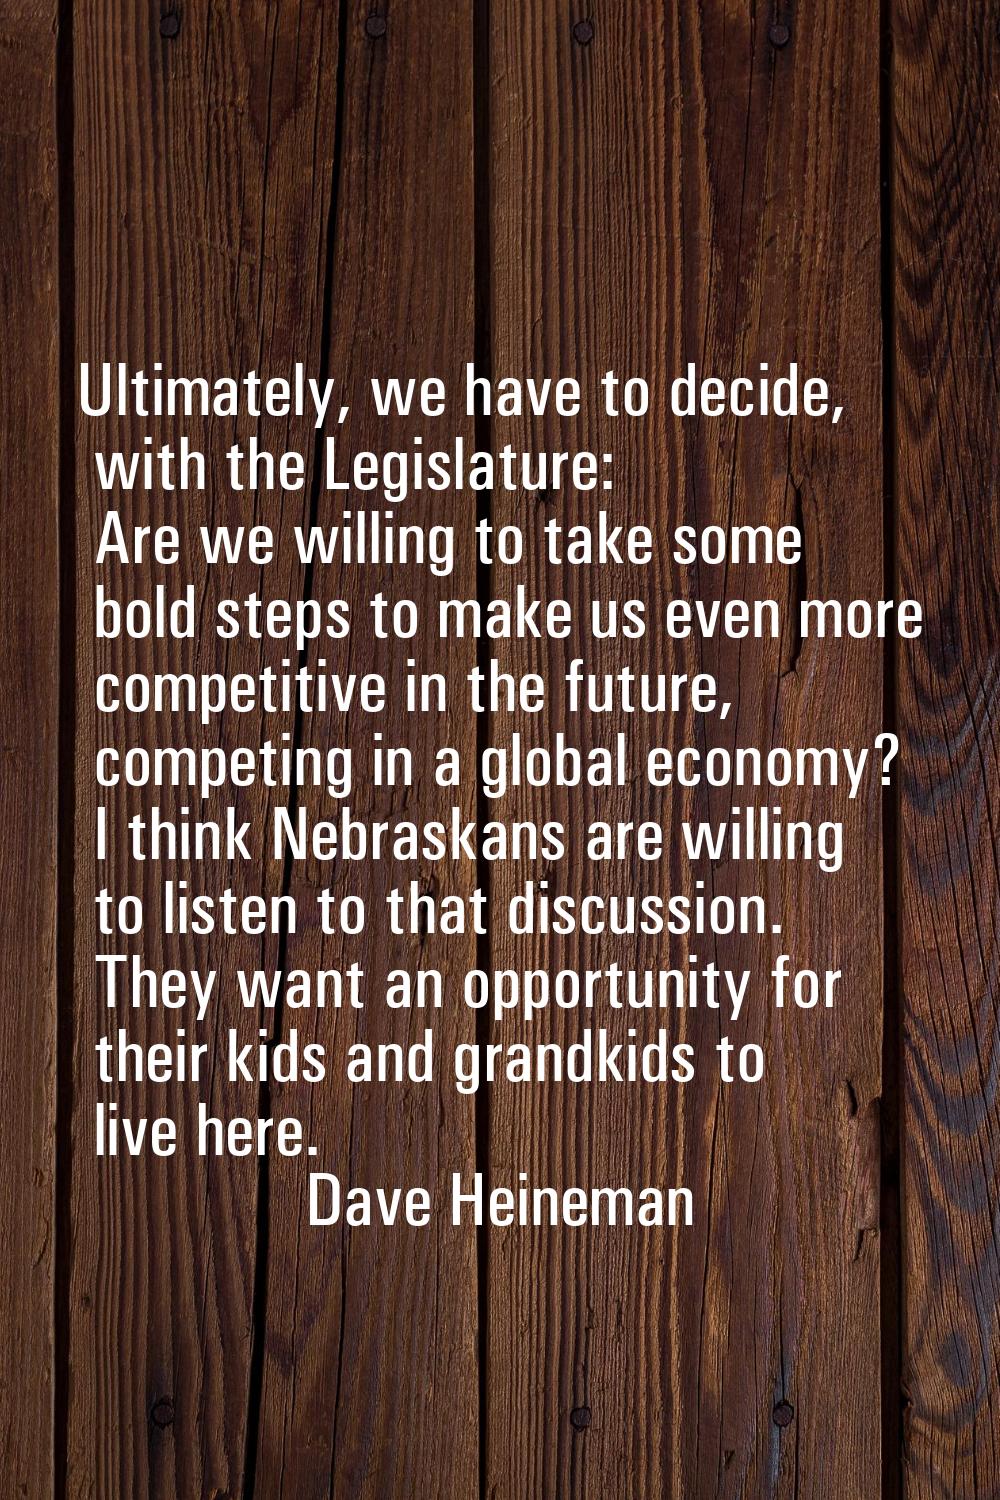 Ultimately, we have to decide, with the Legislature: Are we willing to take some bold steps to make